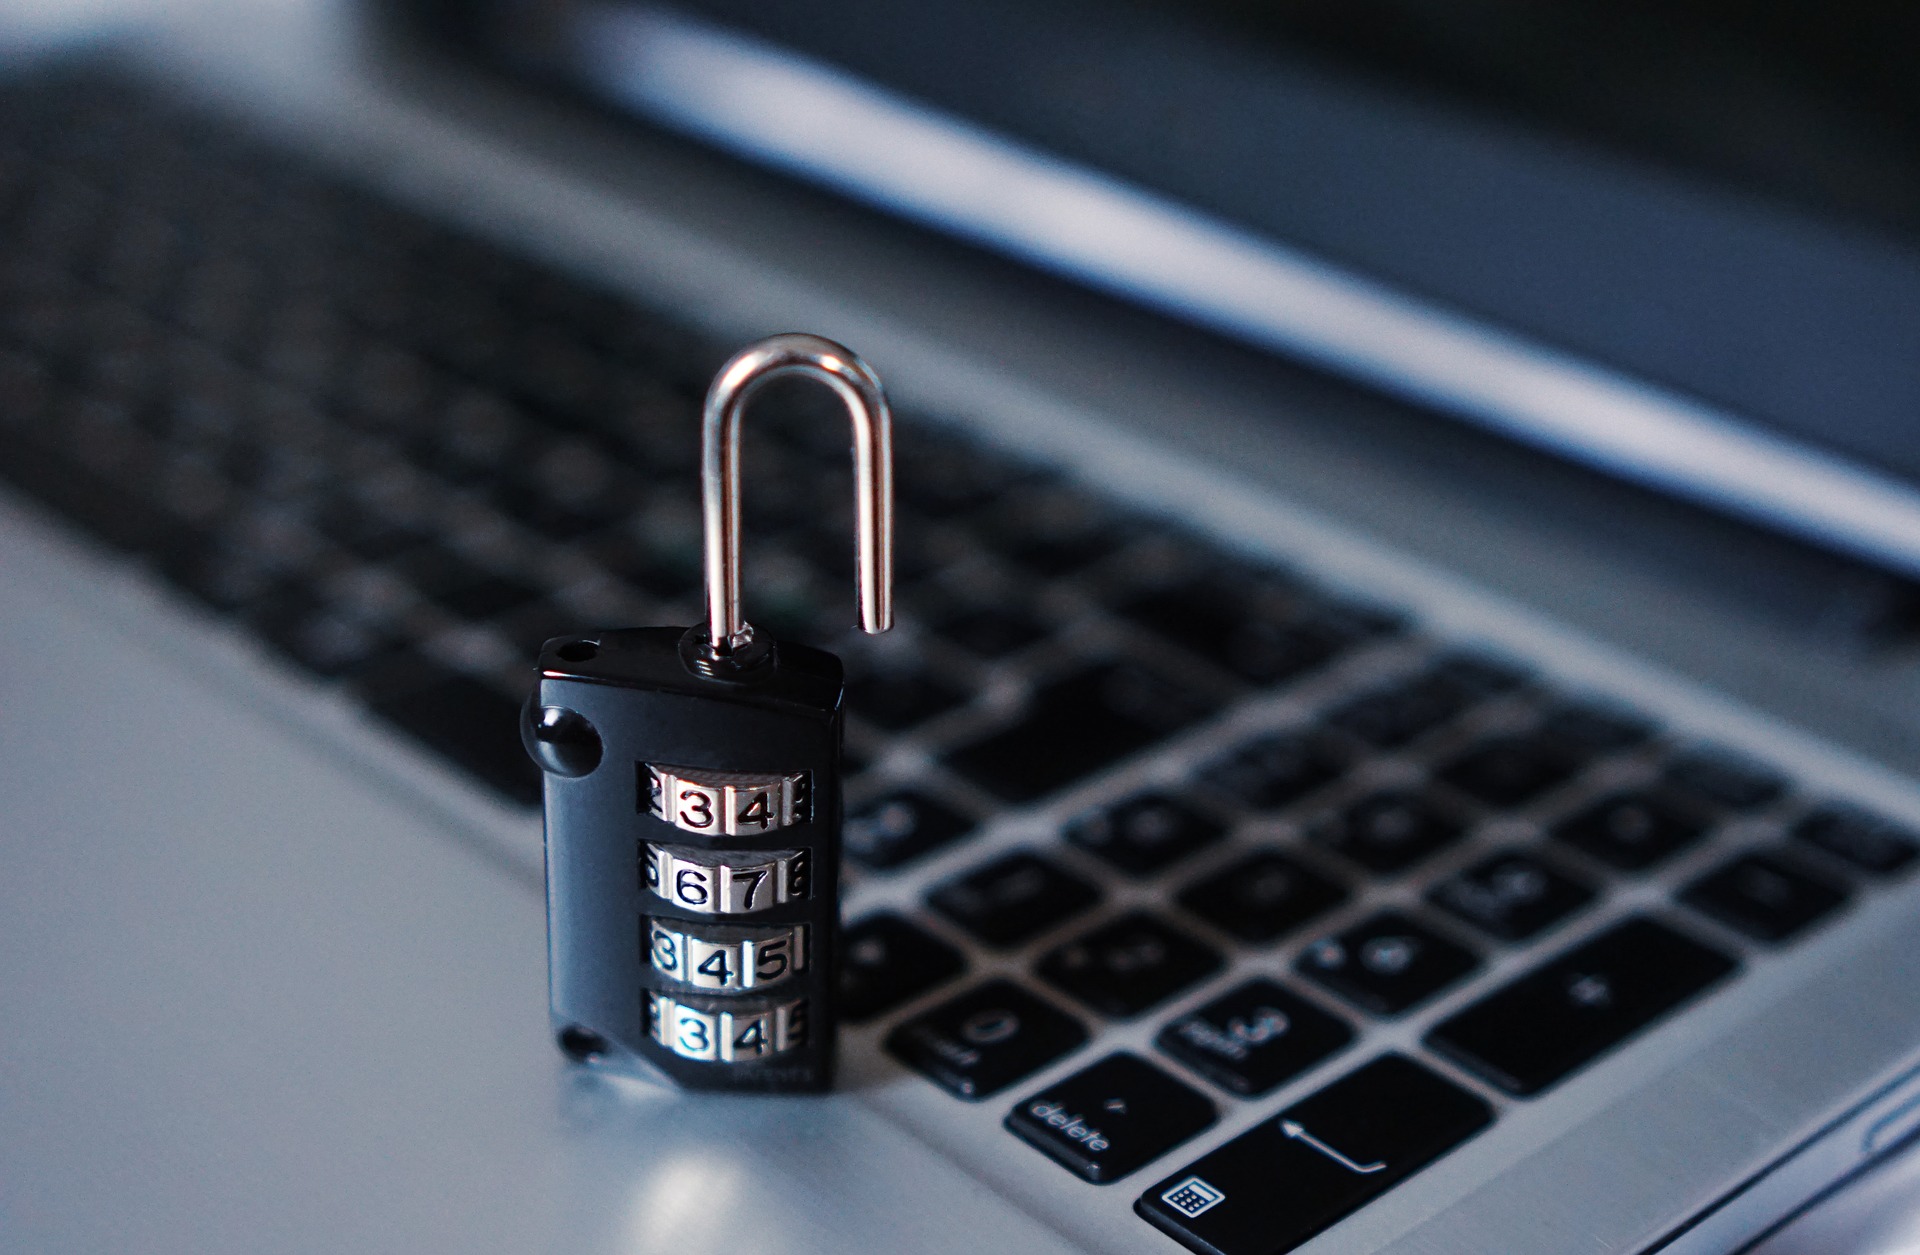 Cyber Security for small business